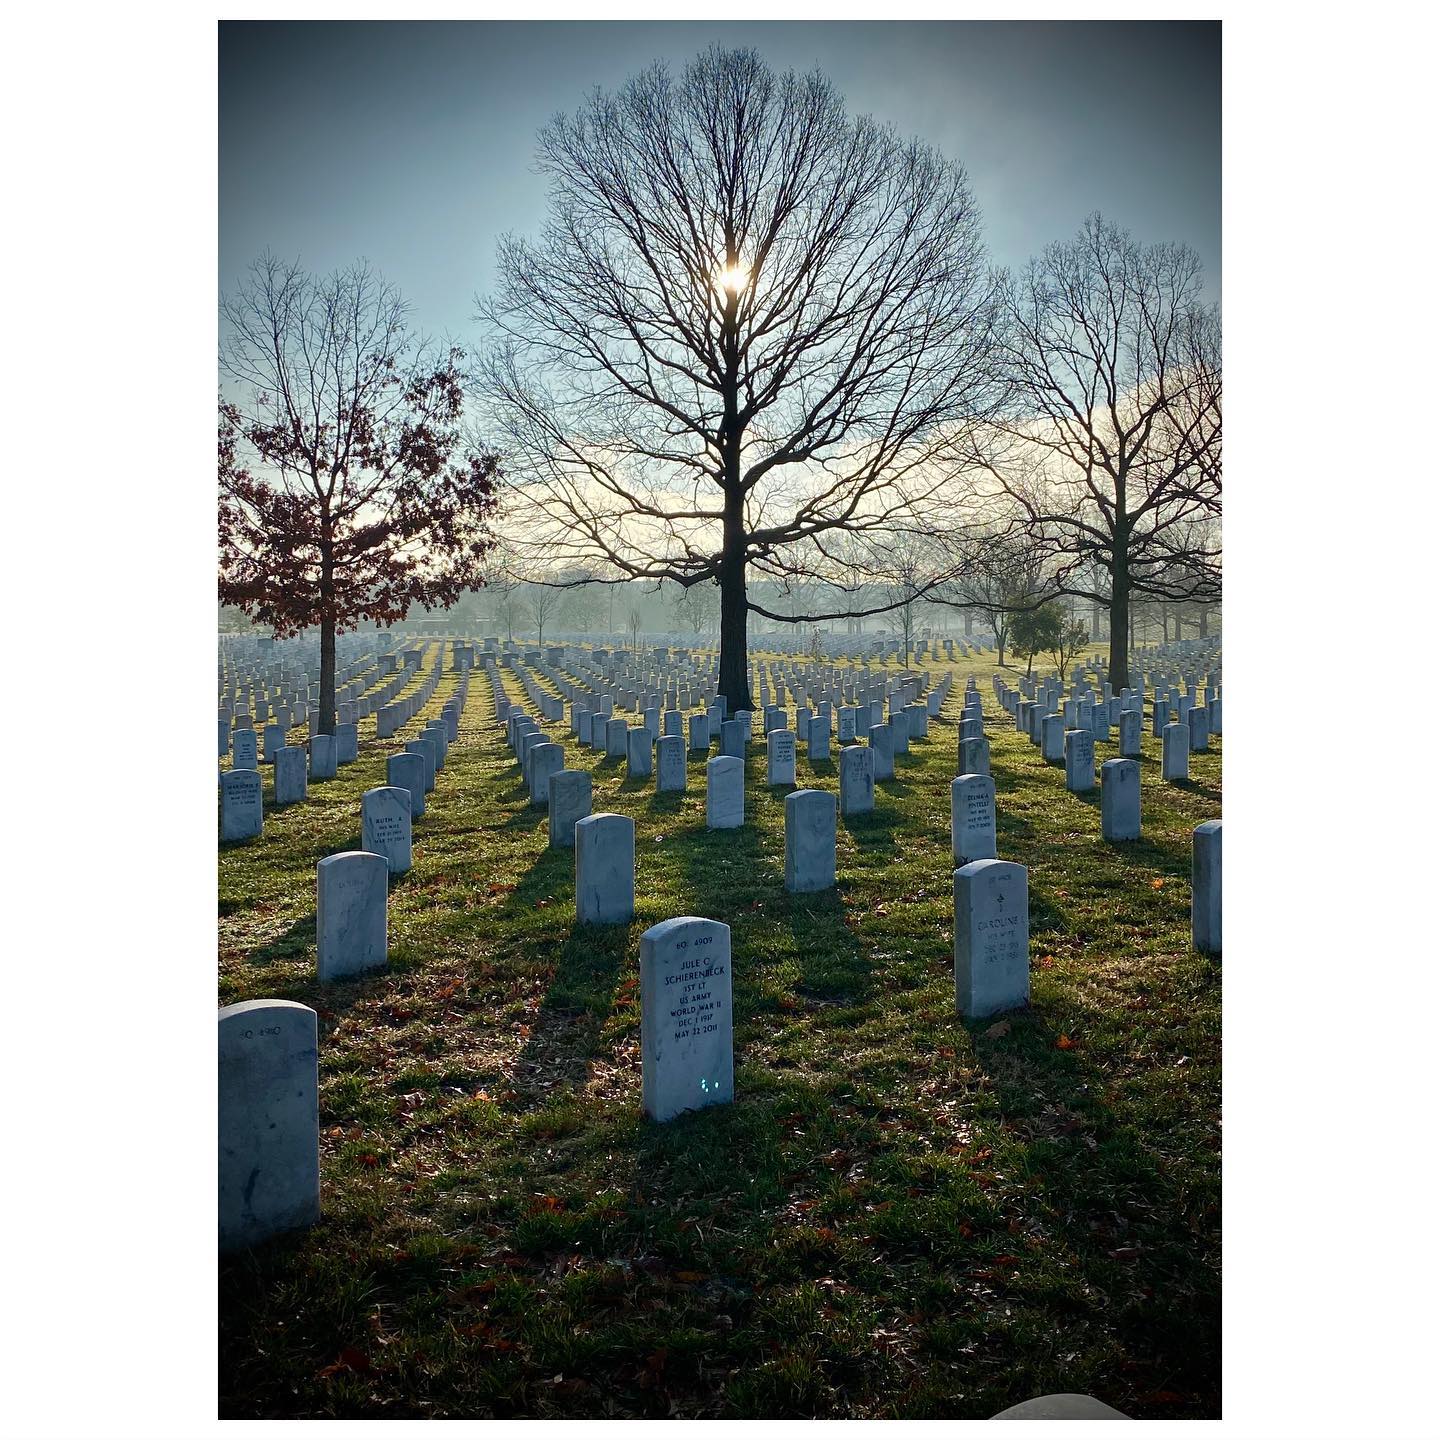 Before one of our services this morning just as the sun broke through the clouds 
#Arlington⠀
#ArlingtonMedia⠀
#ArlingtonCemetery⠀
#ArlingtonNationalCemetery⠀